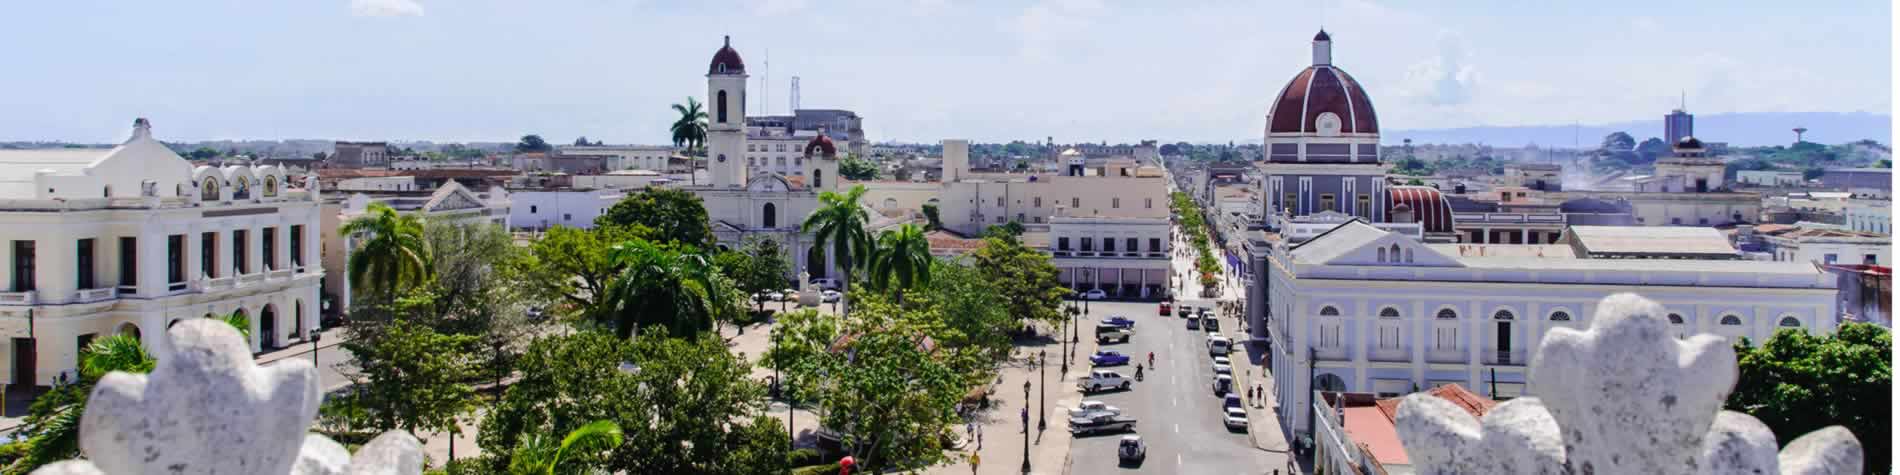 View of Marti Park, Town Hall and cathedral